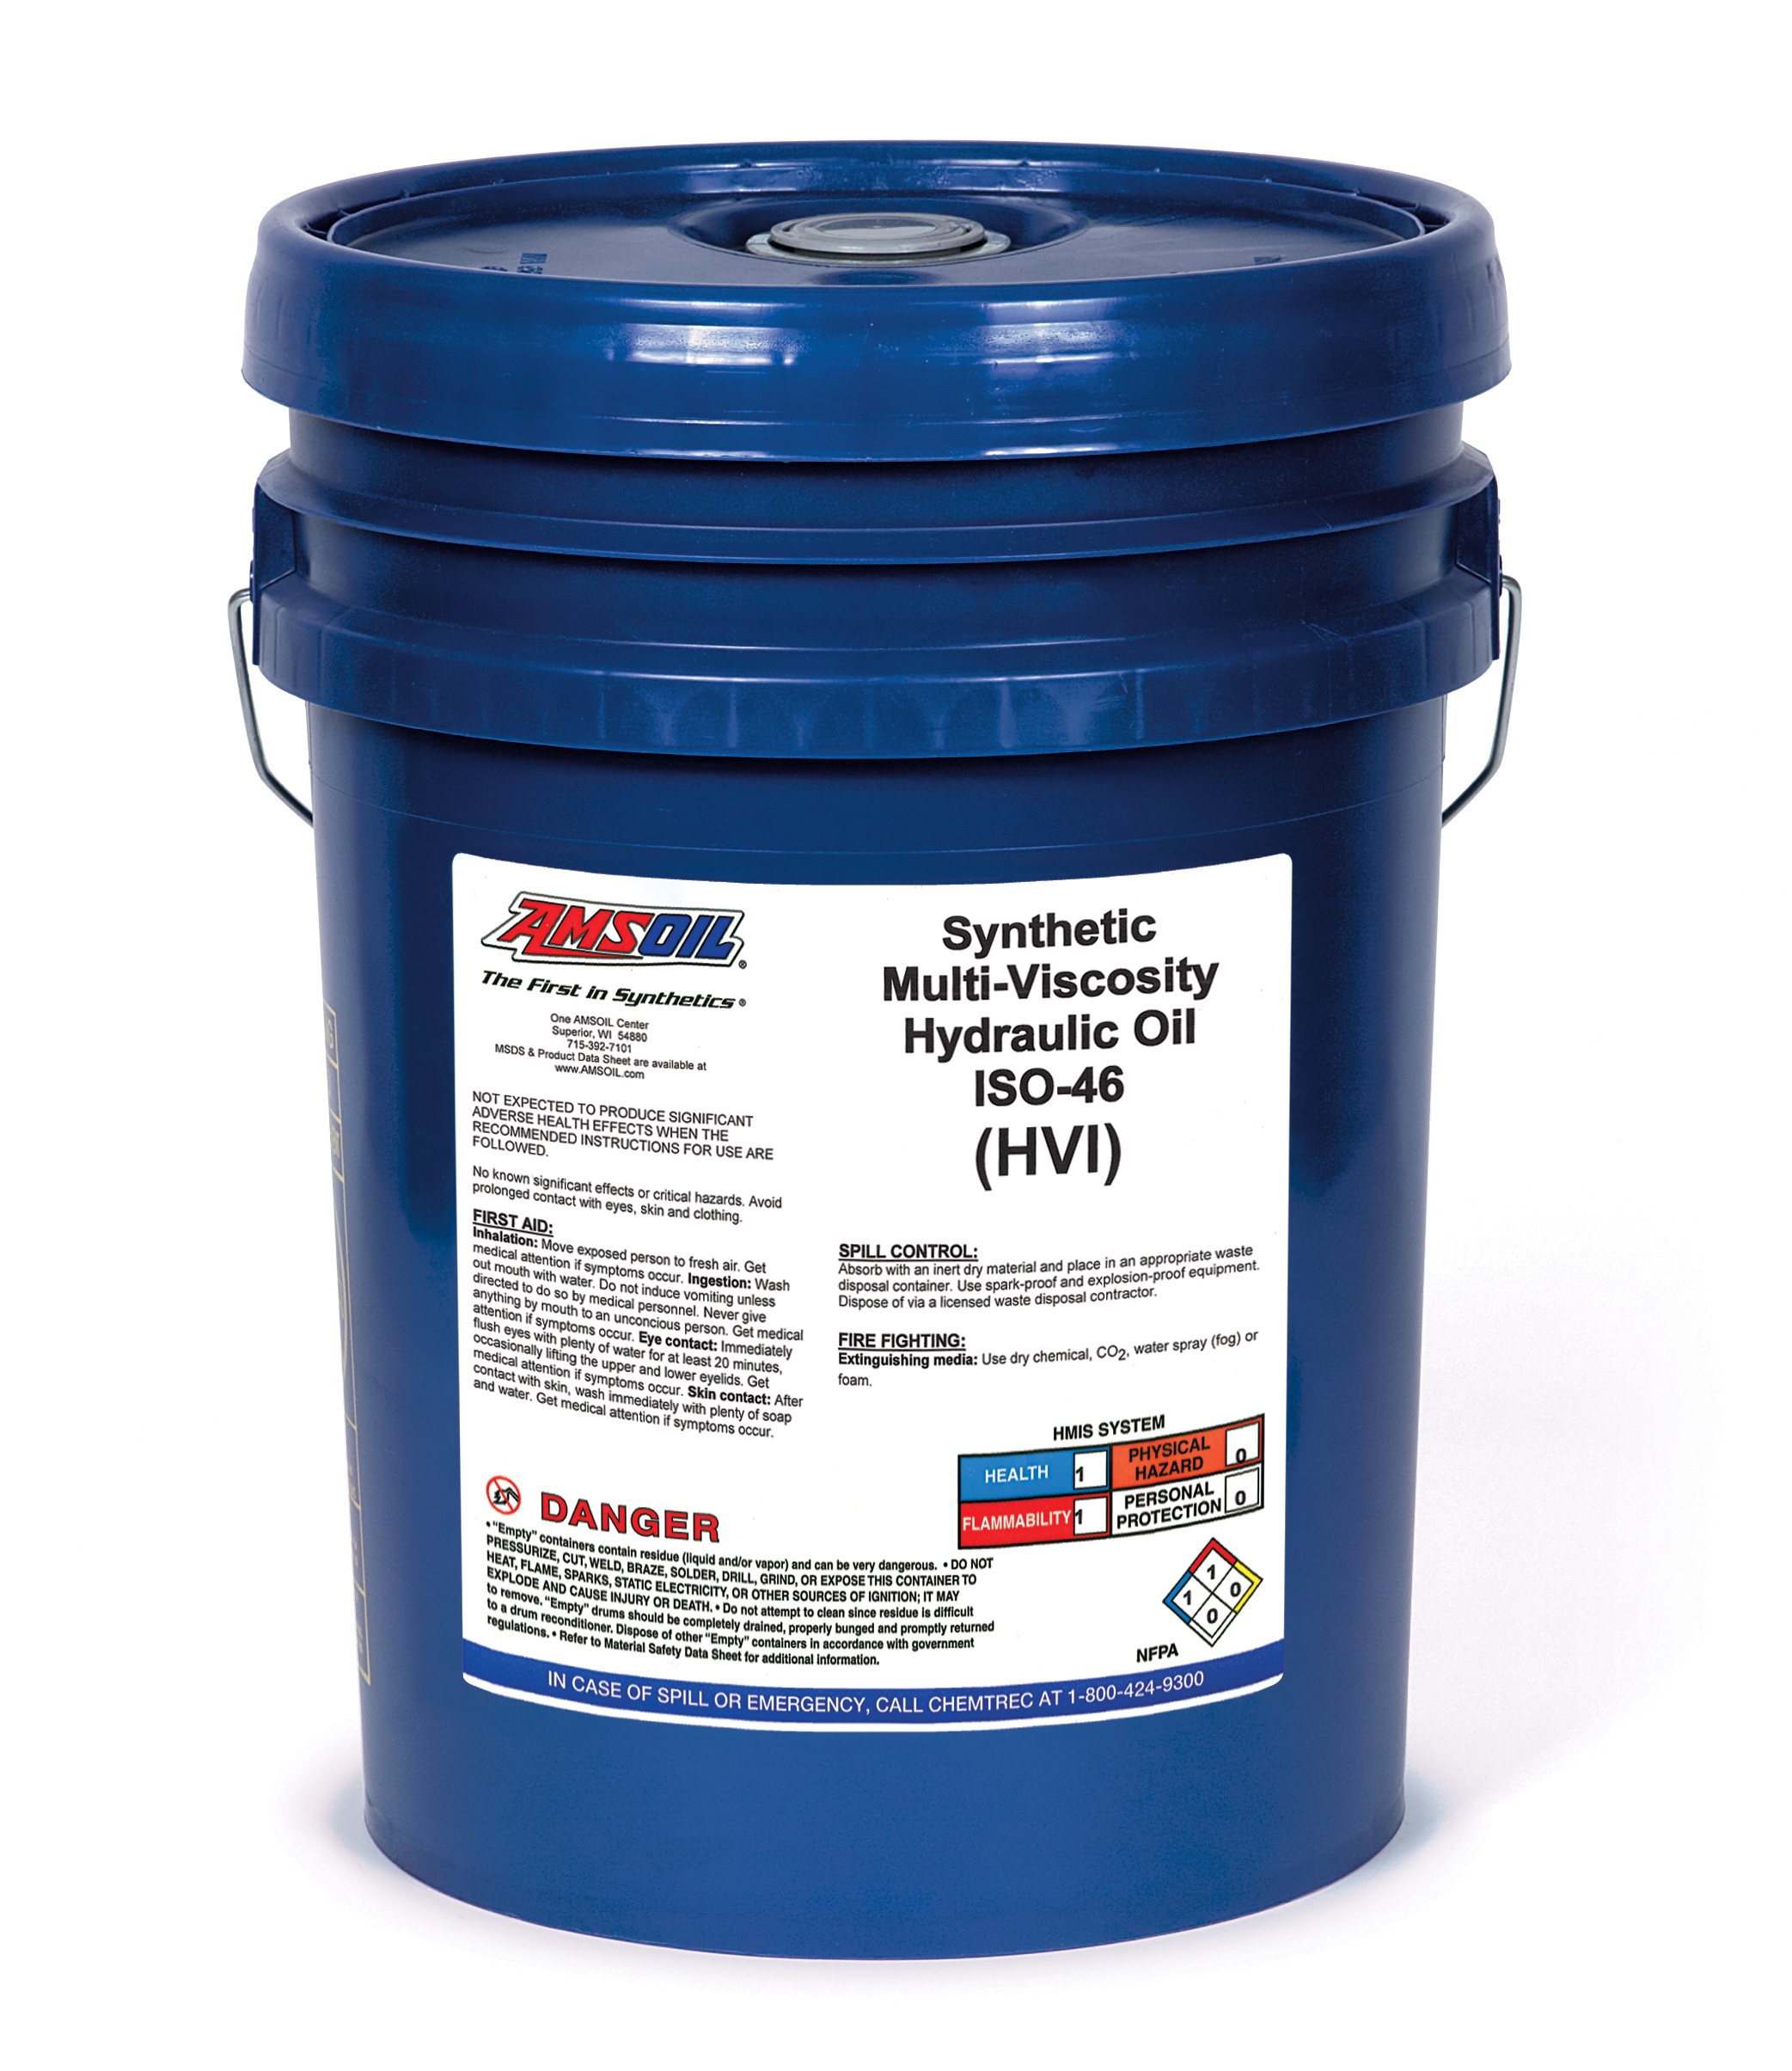 A pail of AMSOIL Synthetic Multi-Viscosity Hydraulic Oil, which is formulated with varnish-control technology to keep hydraulic systems cleaner for long life, reliable operation.